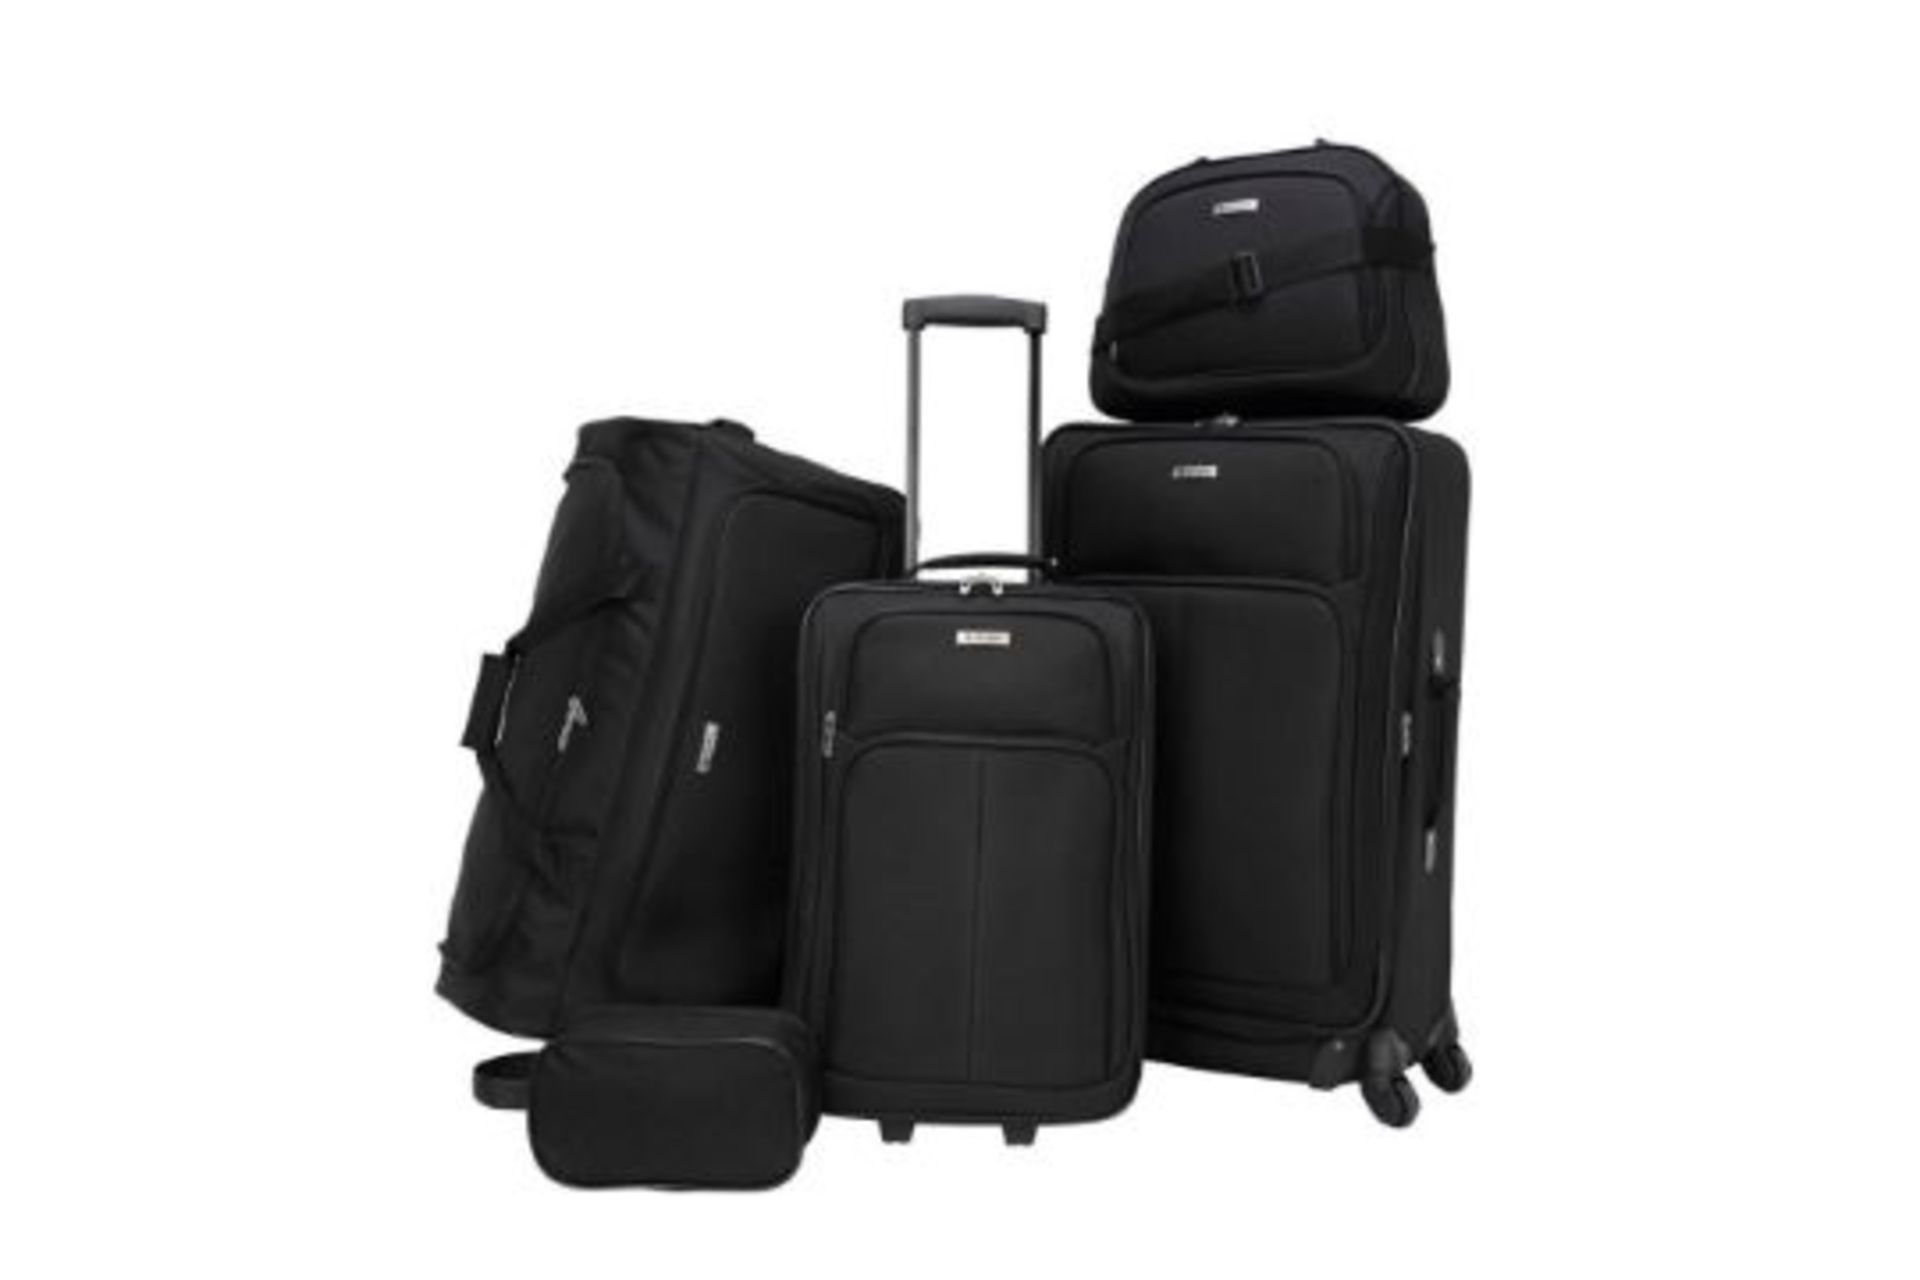 New Set OF TAG Ridgefield Black 5 Piece Softside Luggage Set. RRP $300. This classic set from Tag